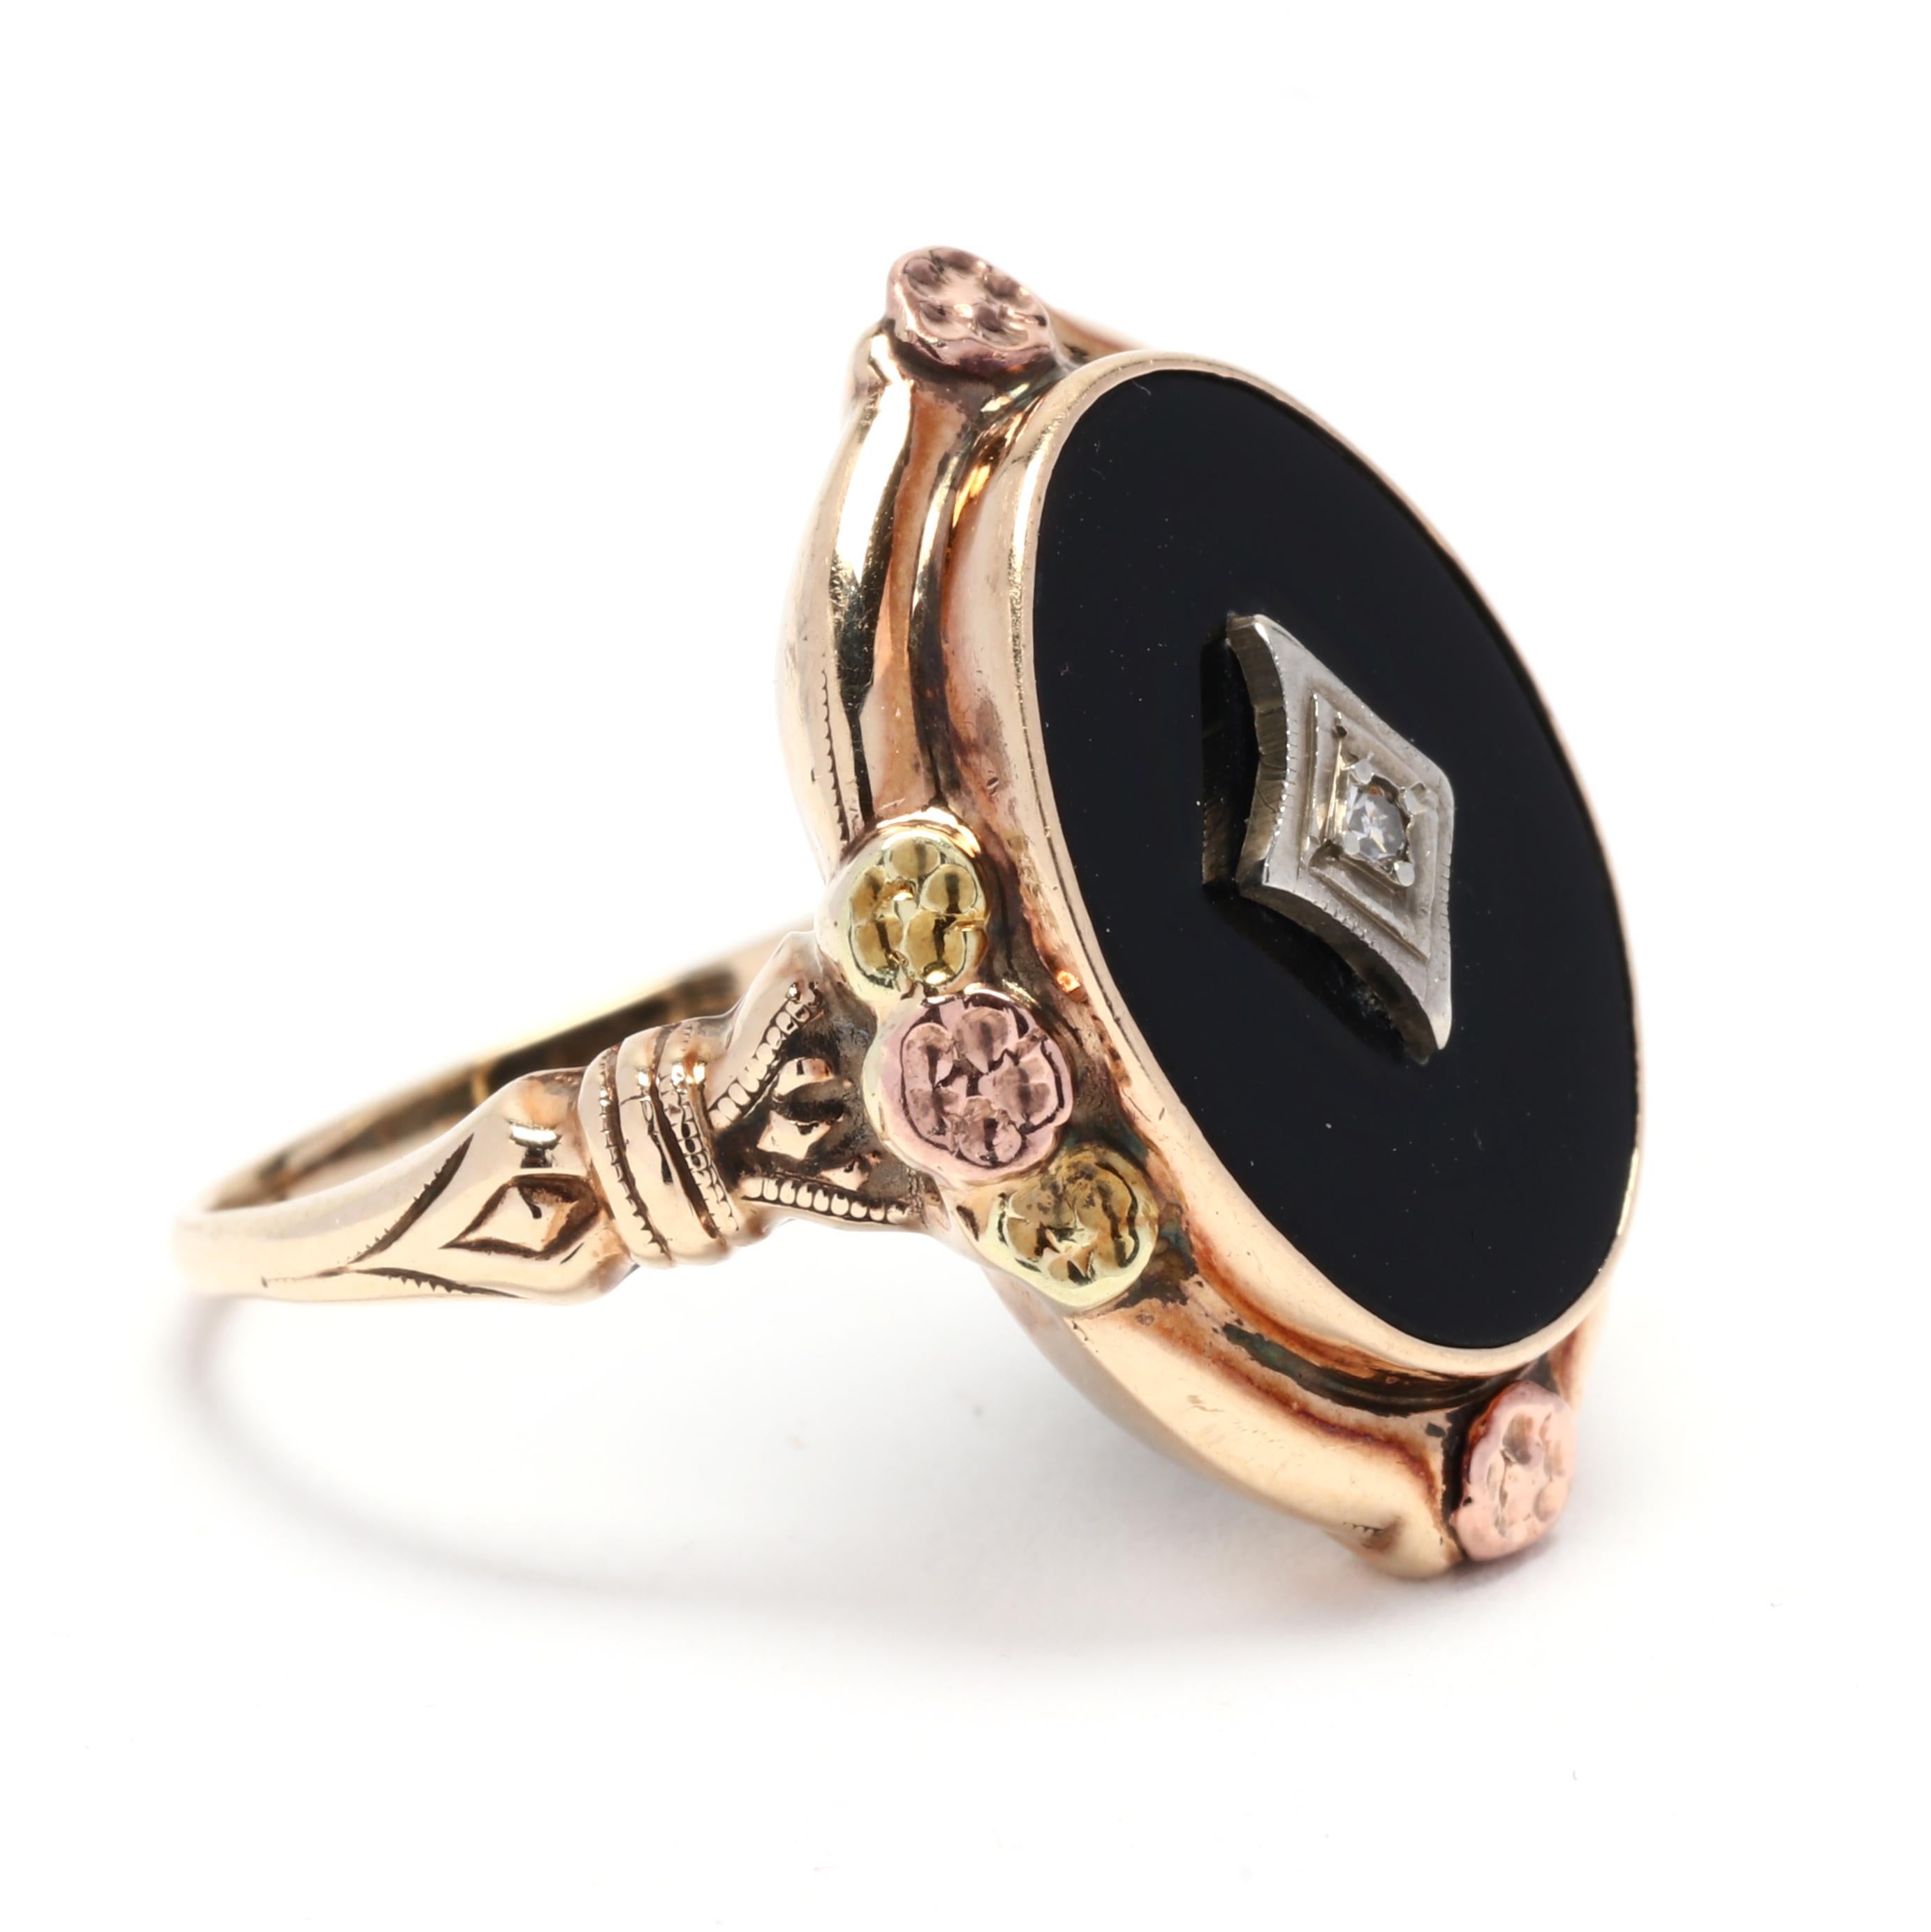 This retro-inspired black onyx diamond ring is a stunning statement piece that will add a touch of vintage charm to any outfit. Crafted in 10K yellow and rose gold, the ring features a rectangular black onyx gemstone at the center. The onyx is